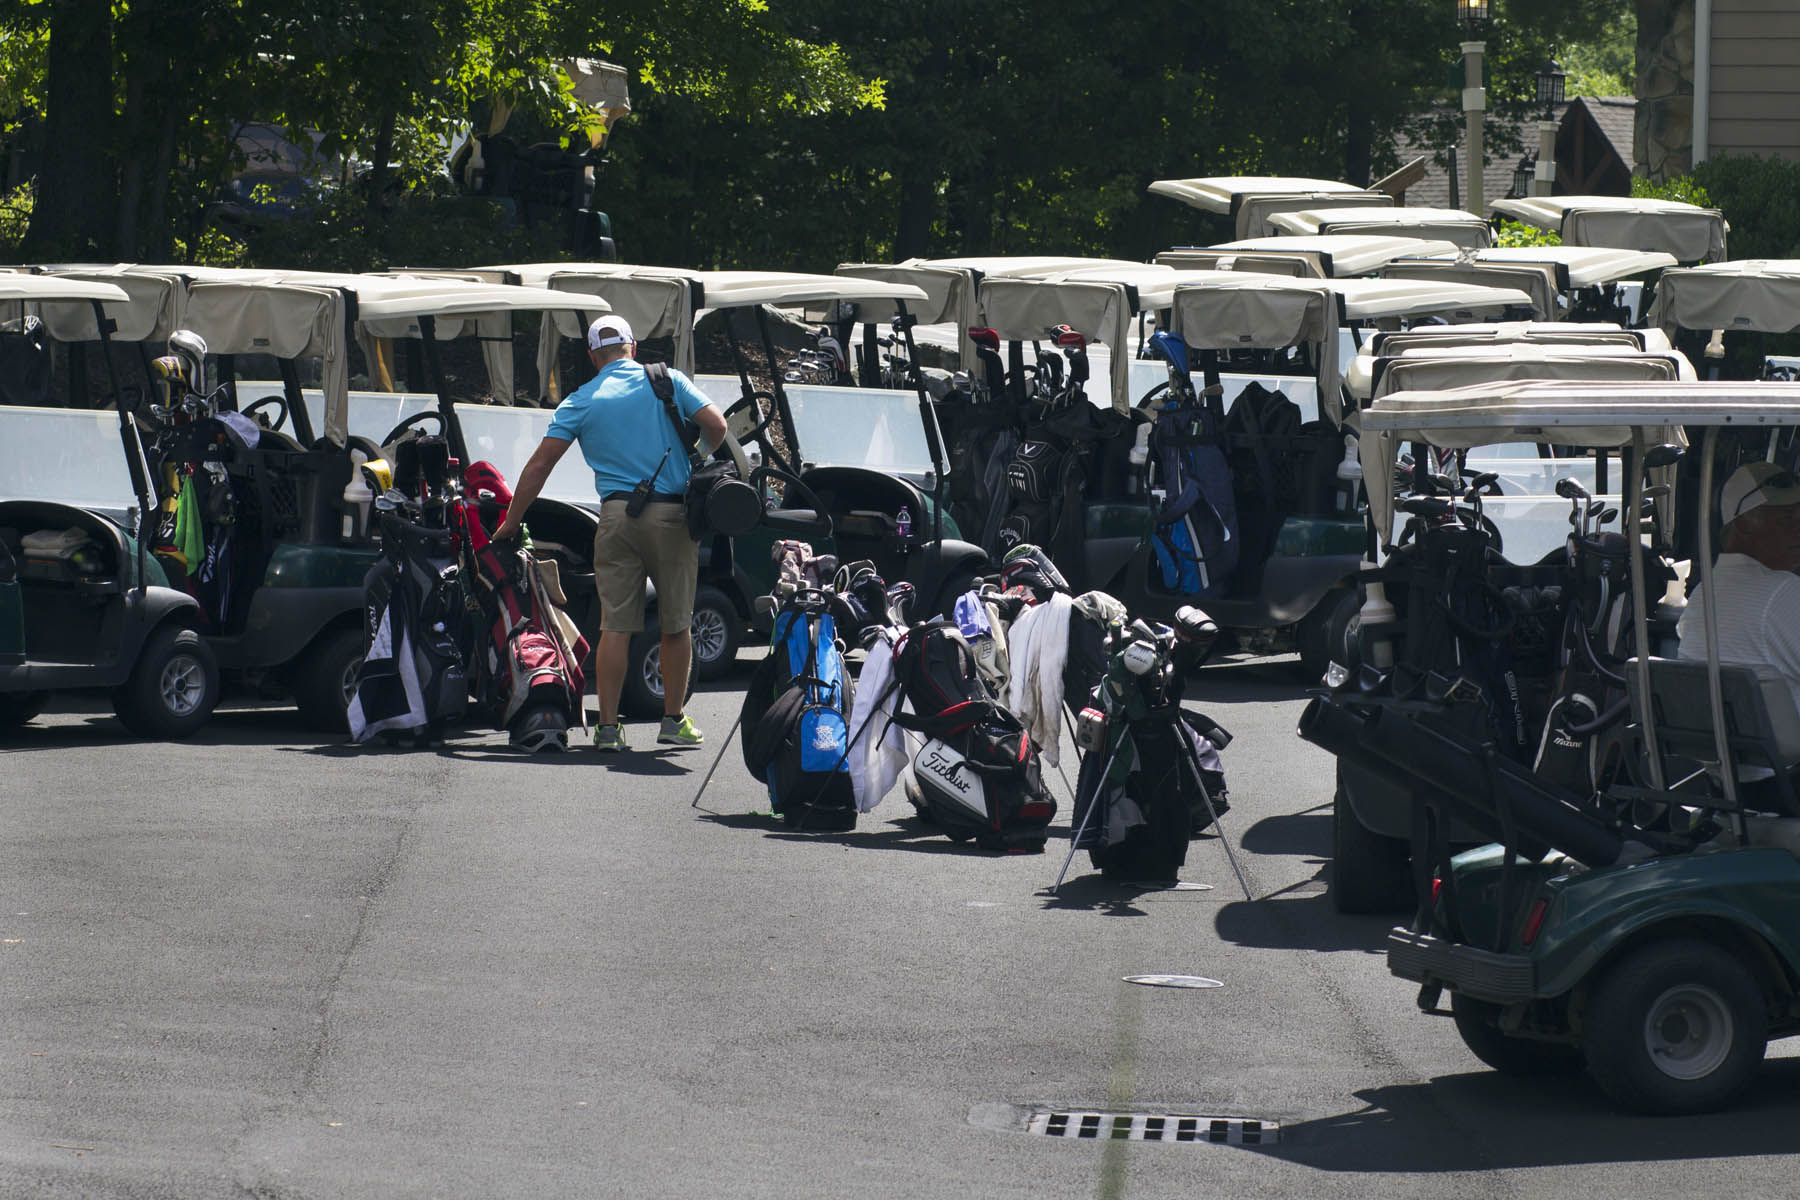 Golf club bags and golf carts.